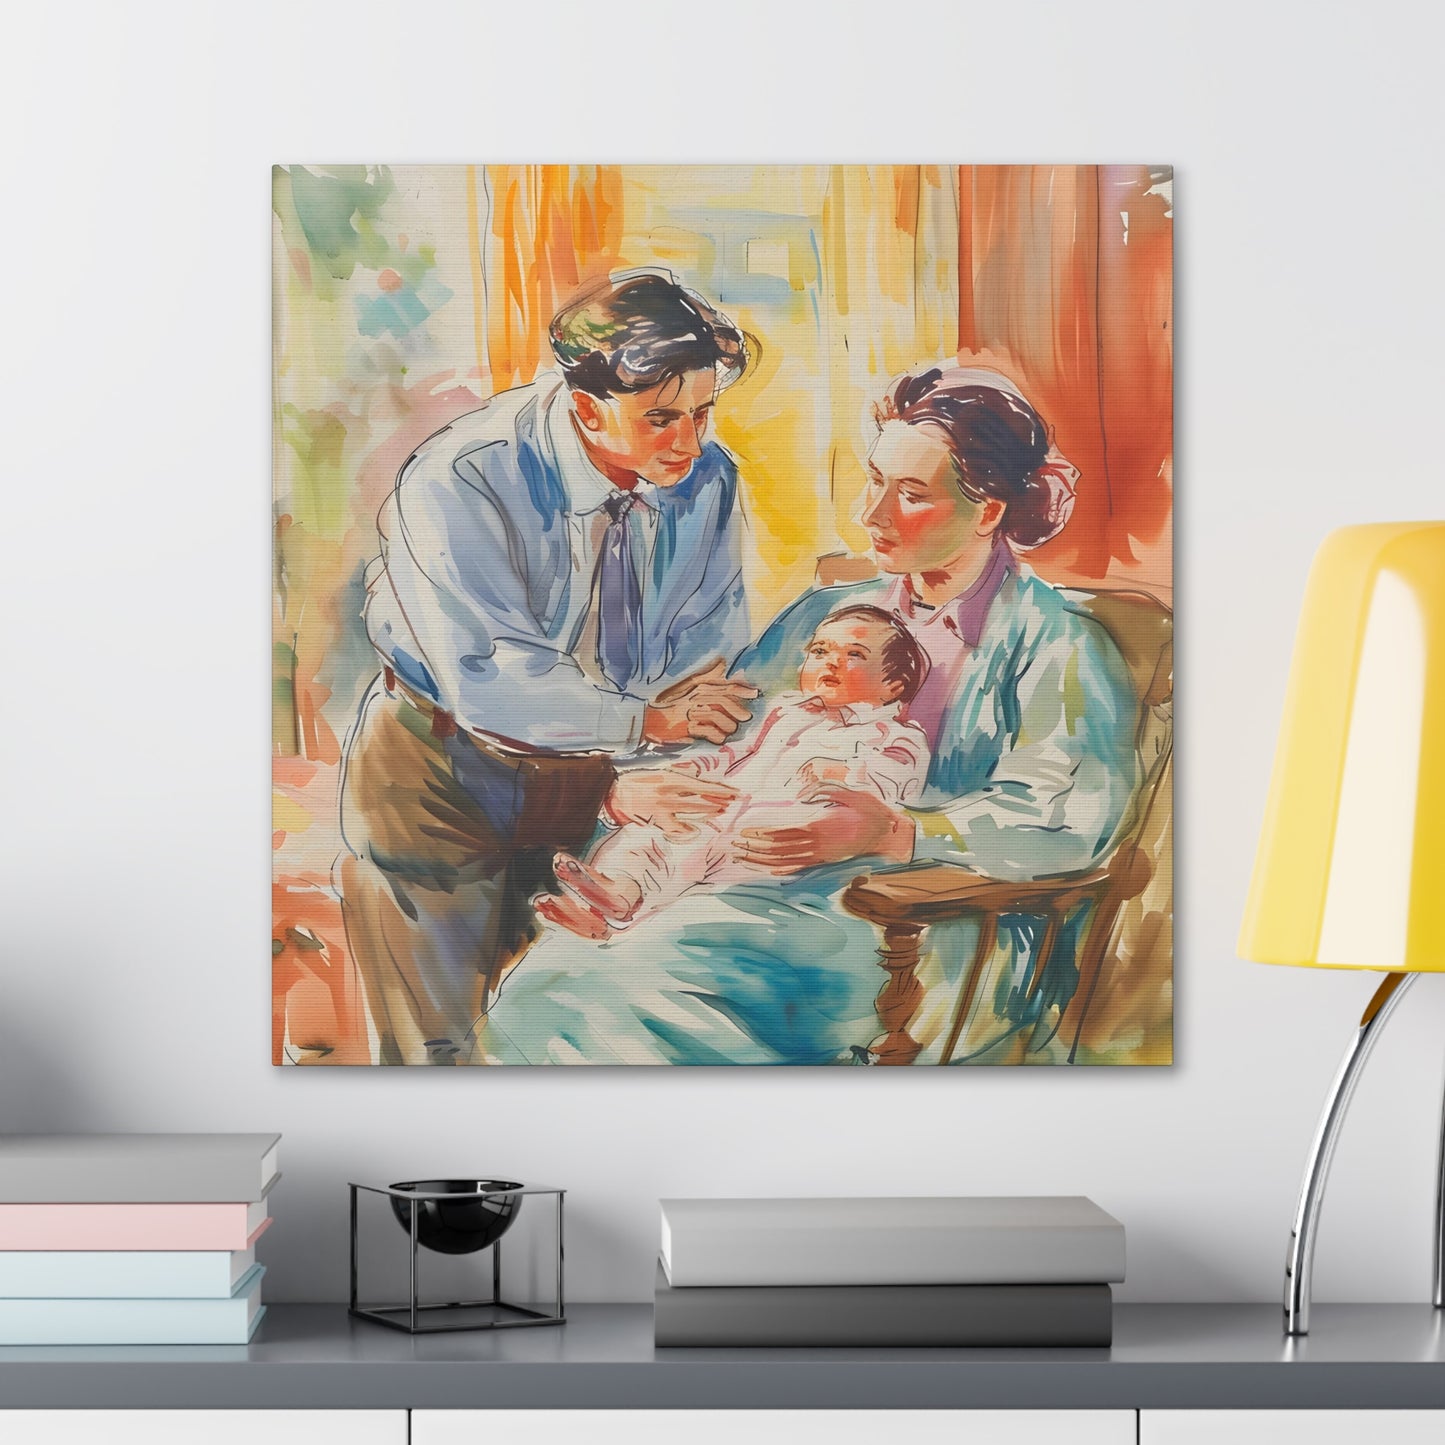 Eloise Seraphine. New Beginnings: Embracing Life's Gentle Unfolding. Exclusive Canvas Print